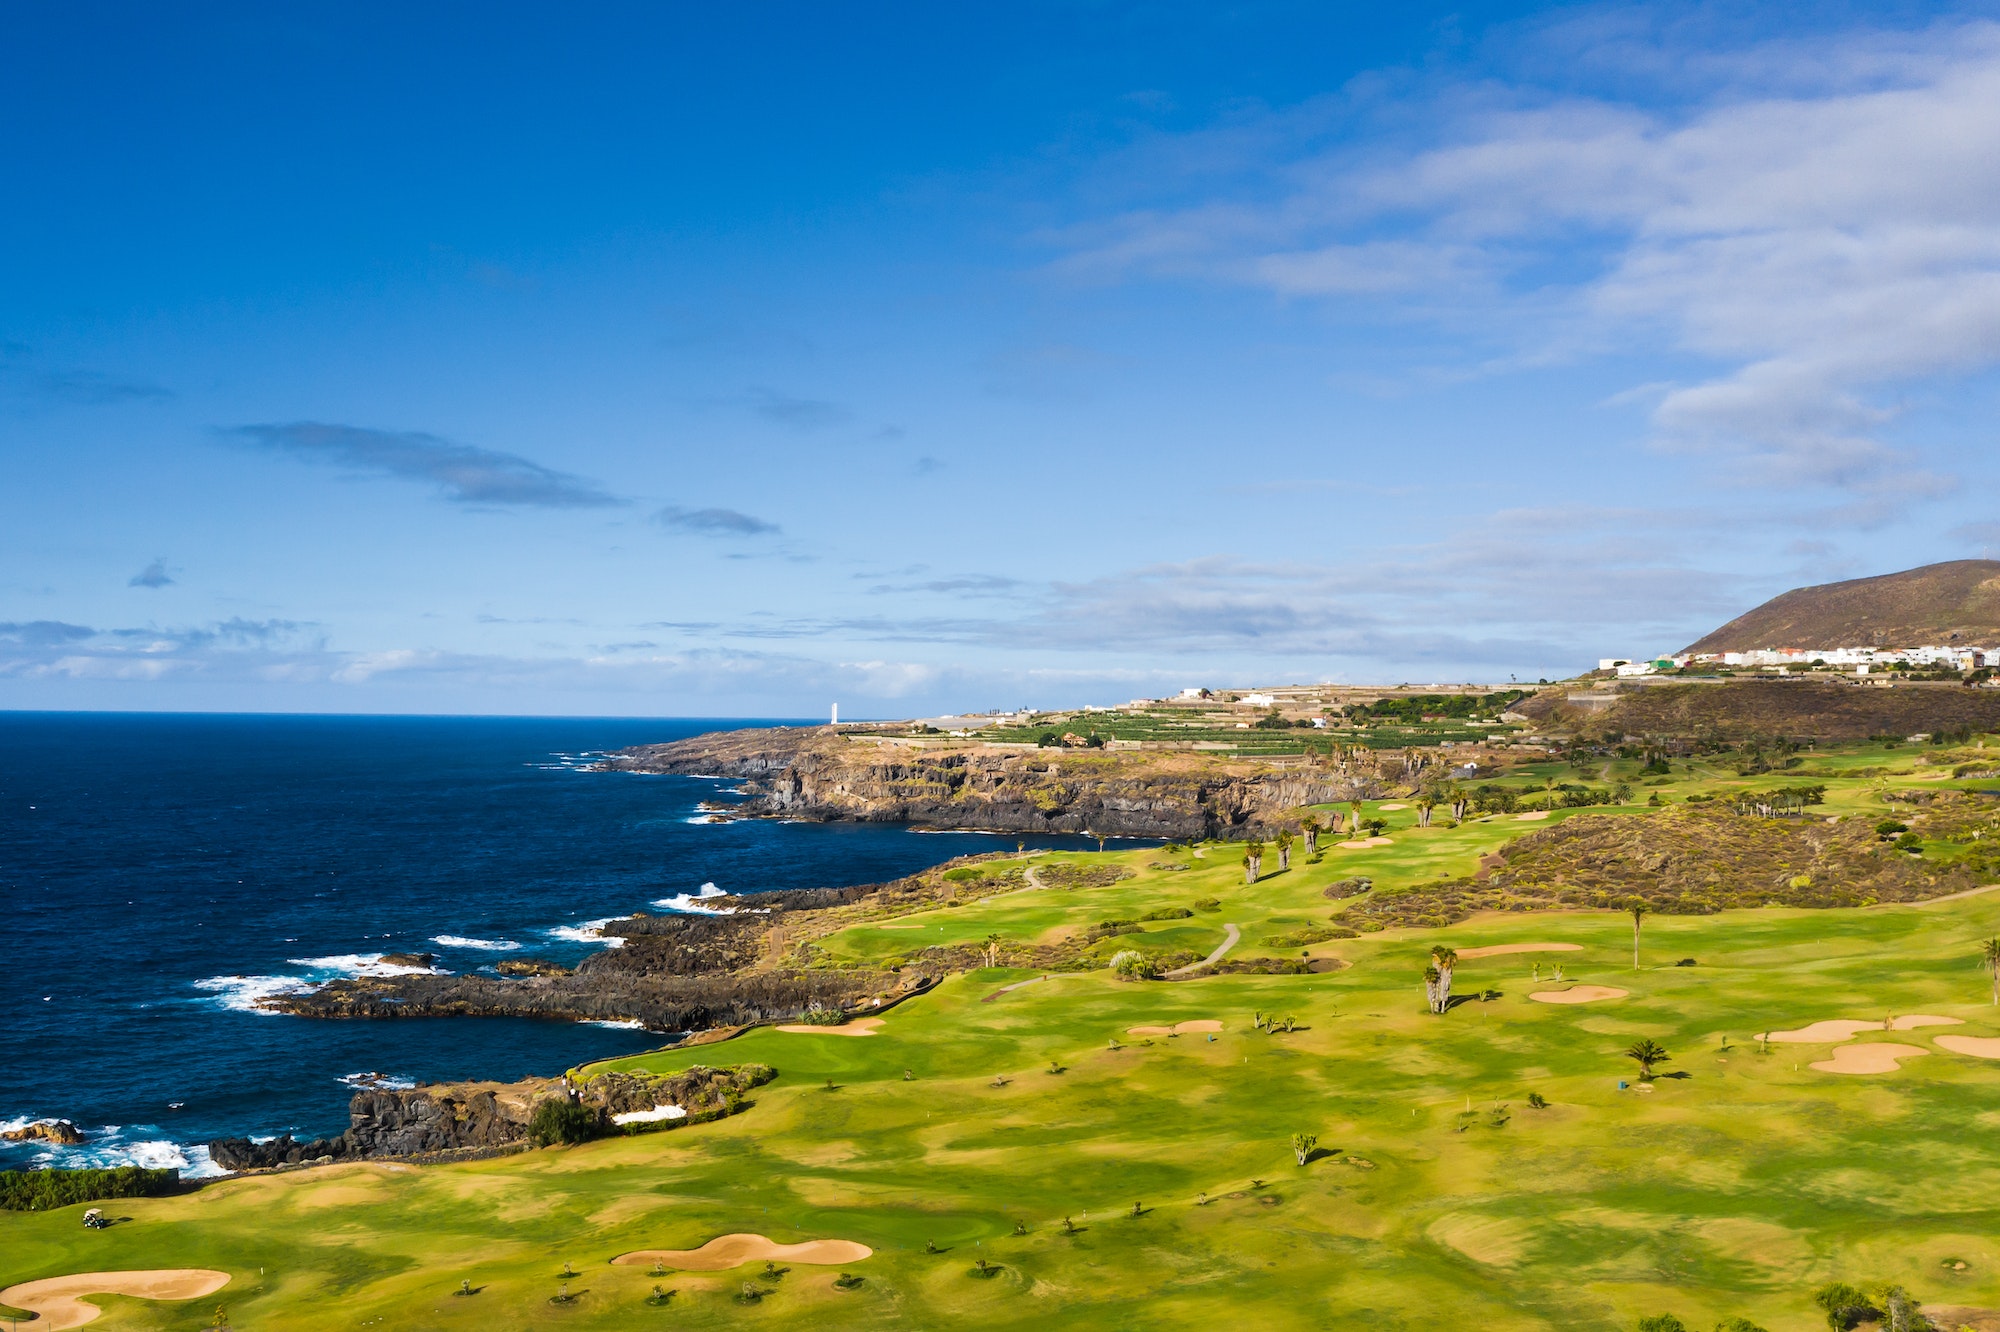 Golf course near the Atlantic ocean in Tenerife, Spain, green Golf course, tennis court in the